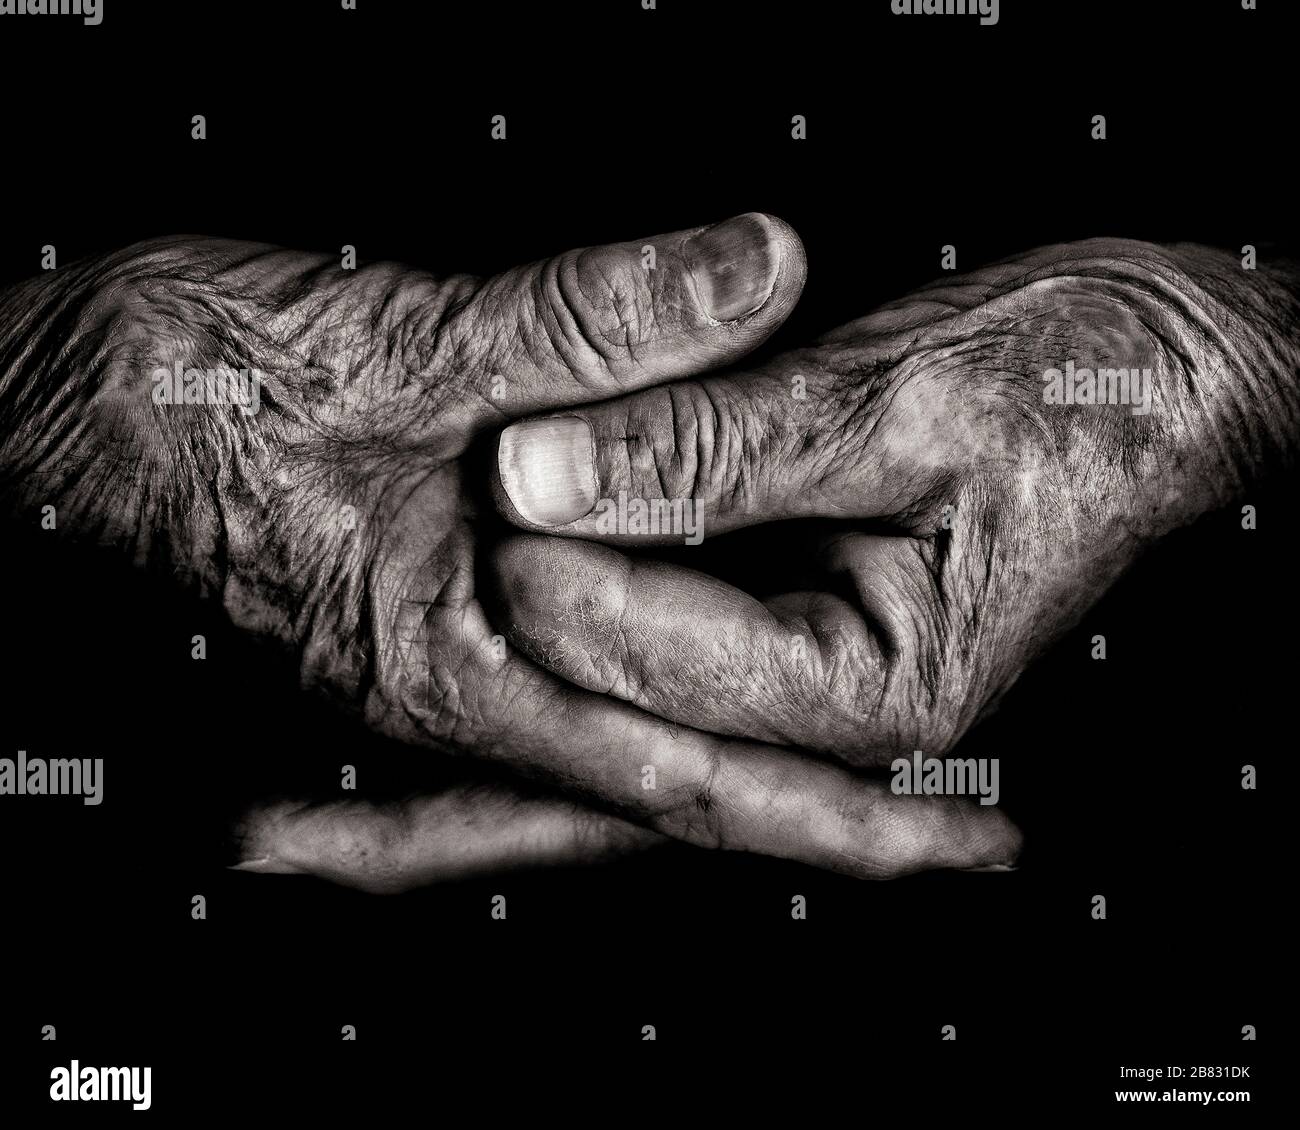 Two Wrinkled Hands against Black Background Stock Photo